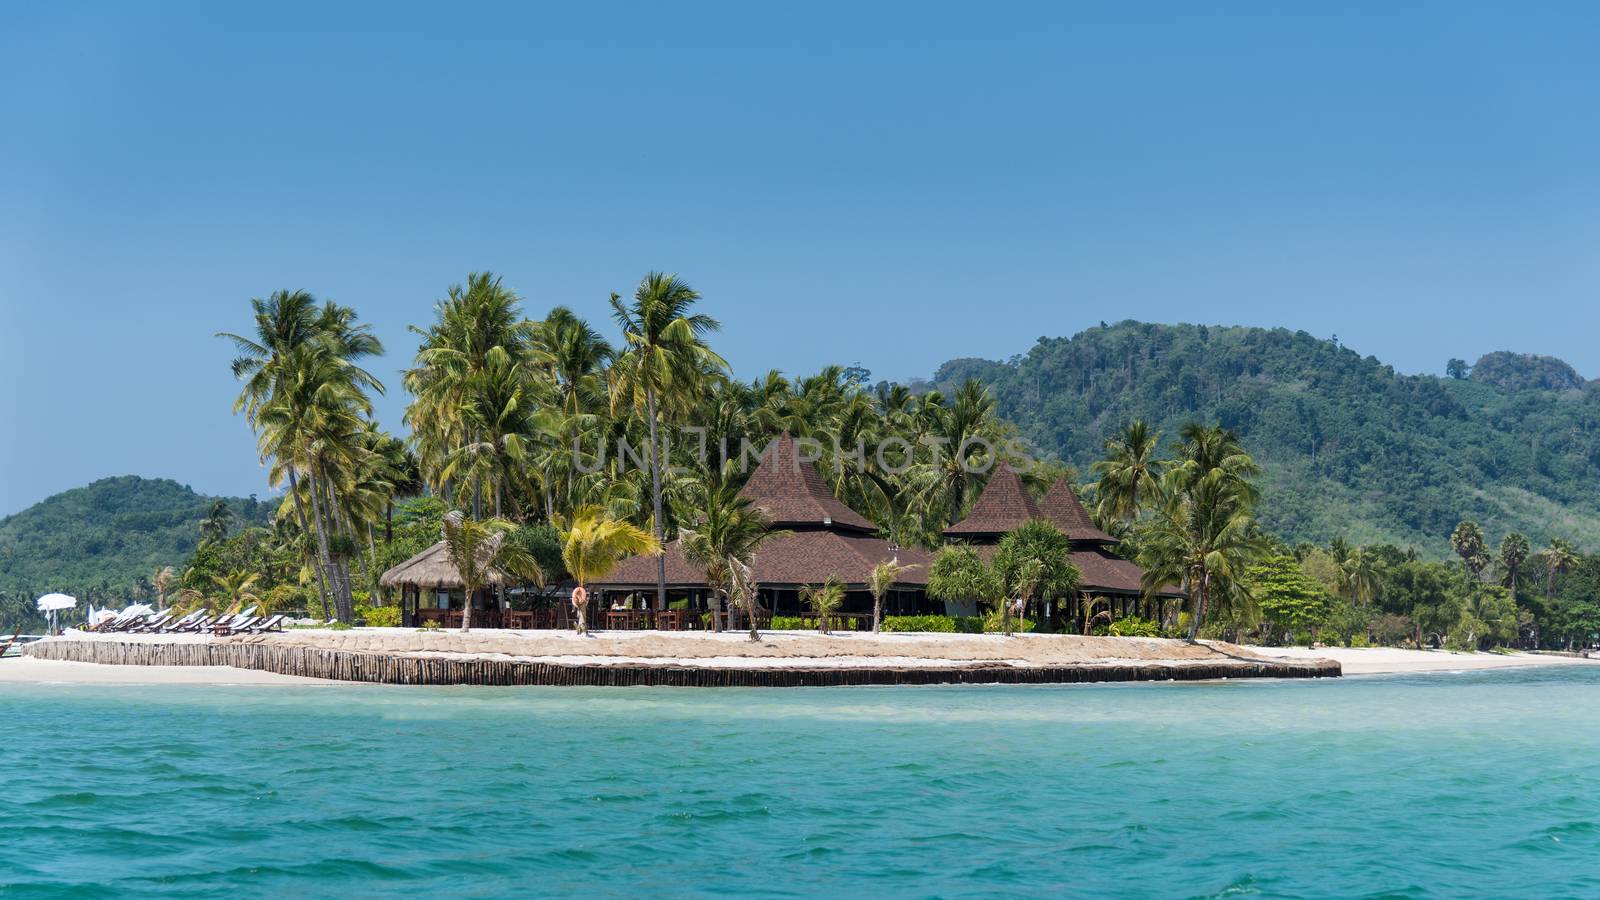 Over water bungalows on island beach with palm trees